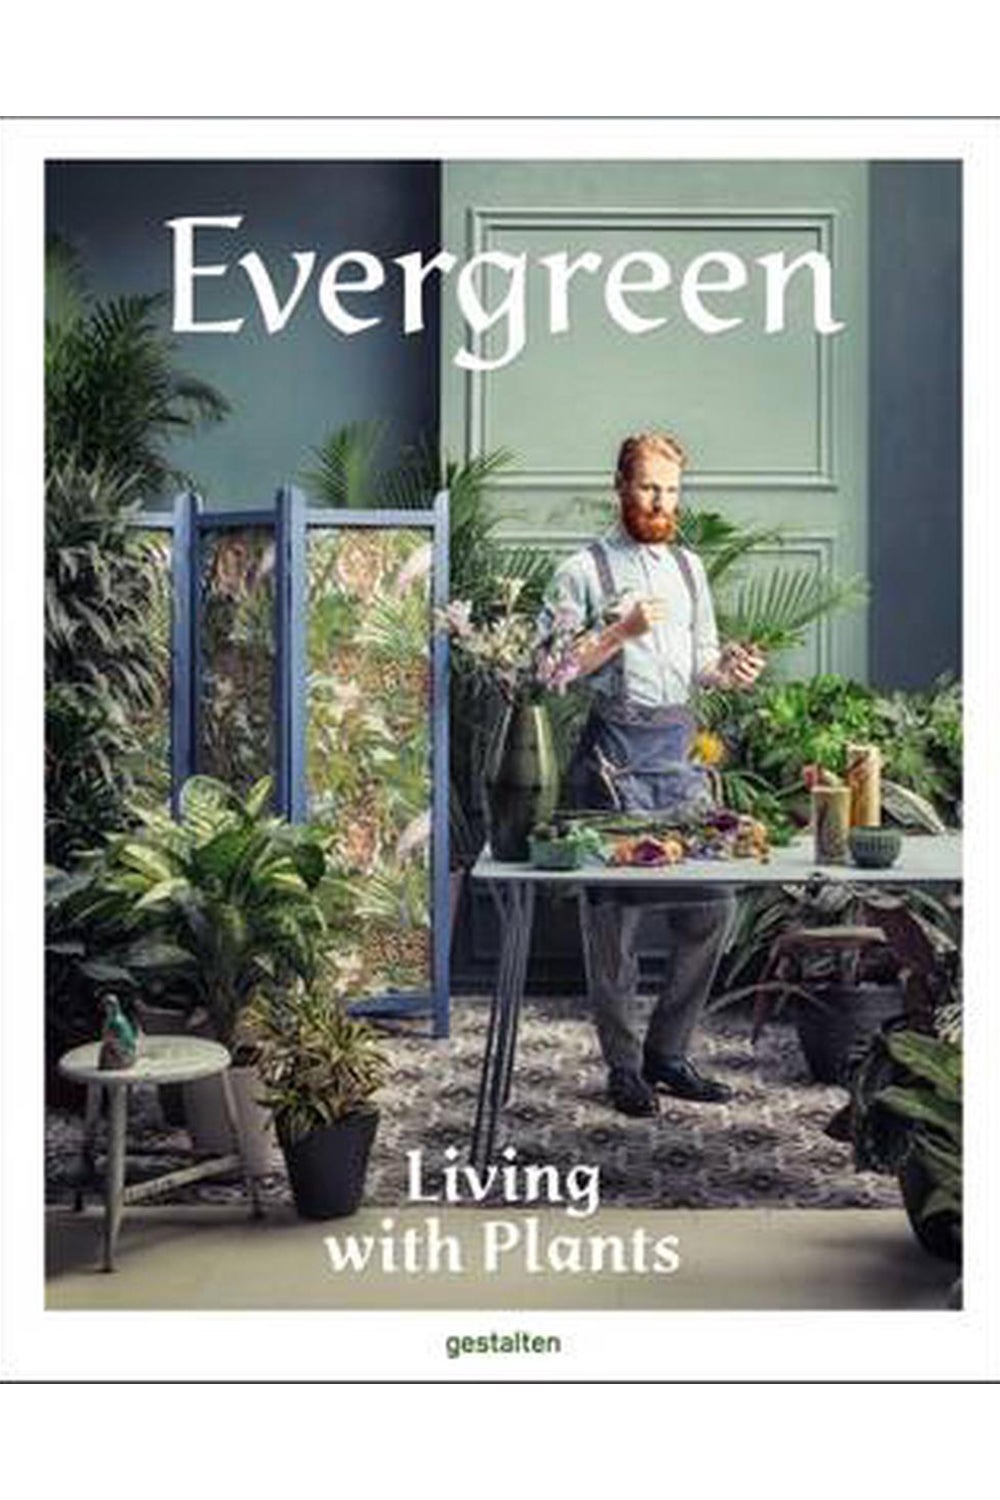 Evergreen: Living With Plants by Gestalten